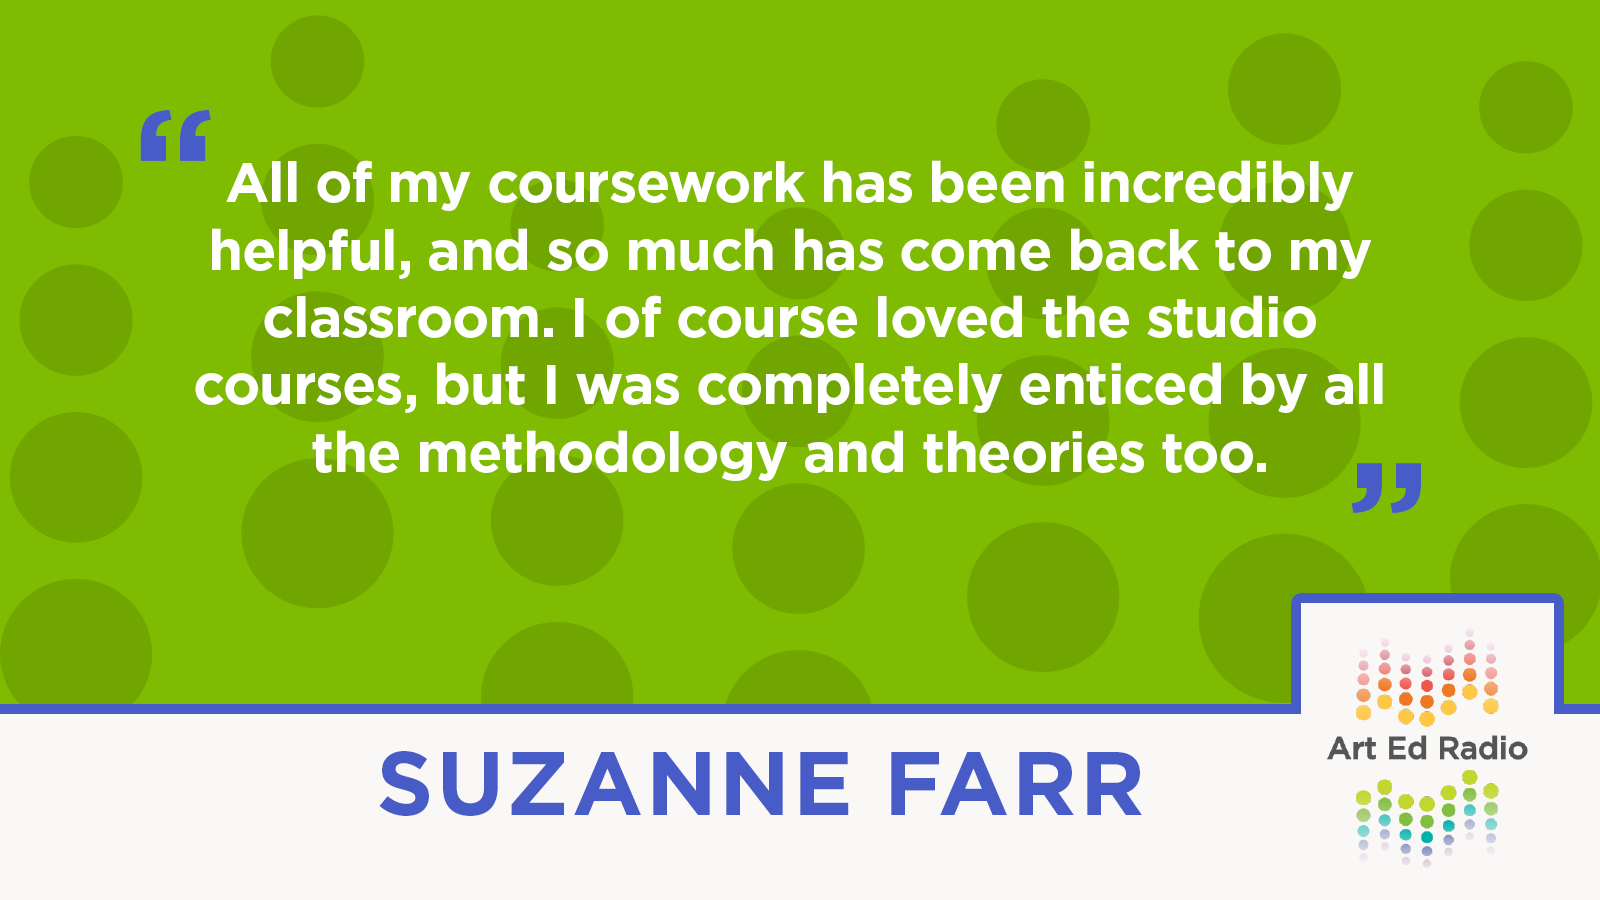 "All of my coursework has been incredibly helpful, and so much has come back to my classroom. I of course loved the studio courses, but I was completely enticed by all the methodology and theories too." --Suzanne Farr